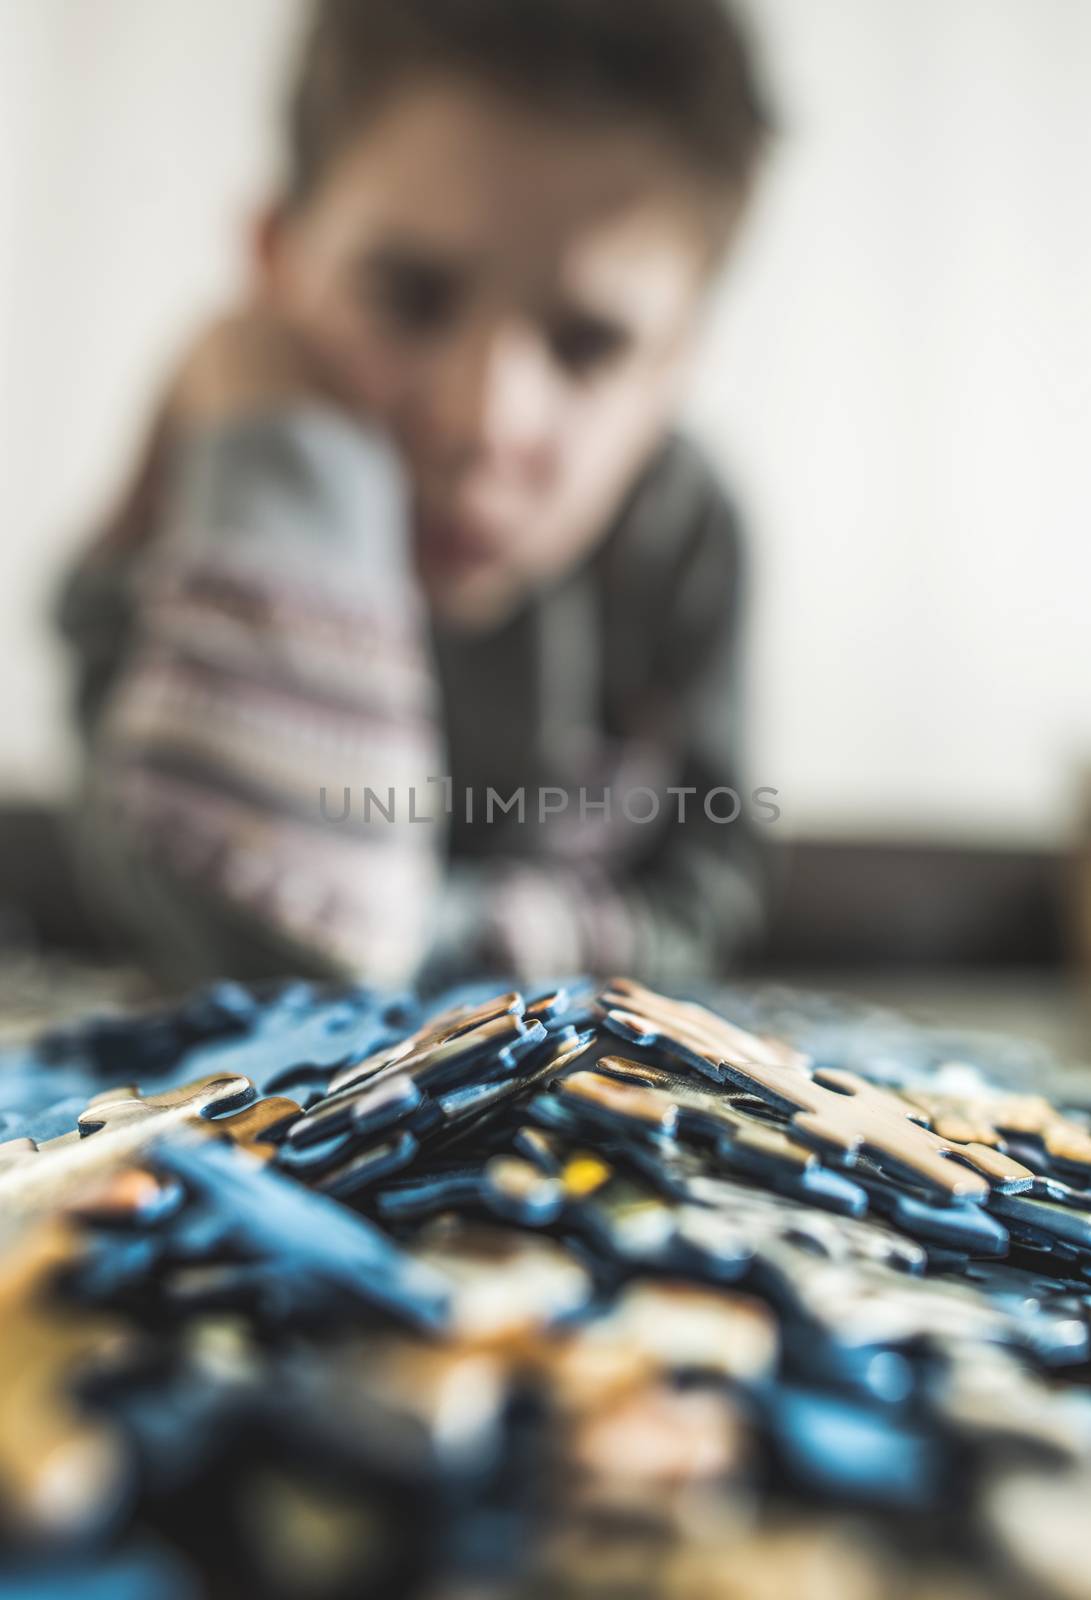 Child and puzzle. by deyan_georgiev